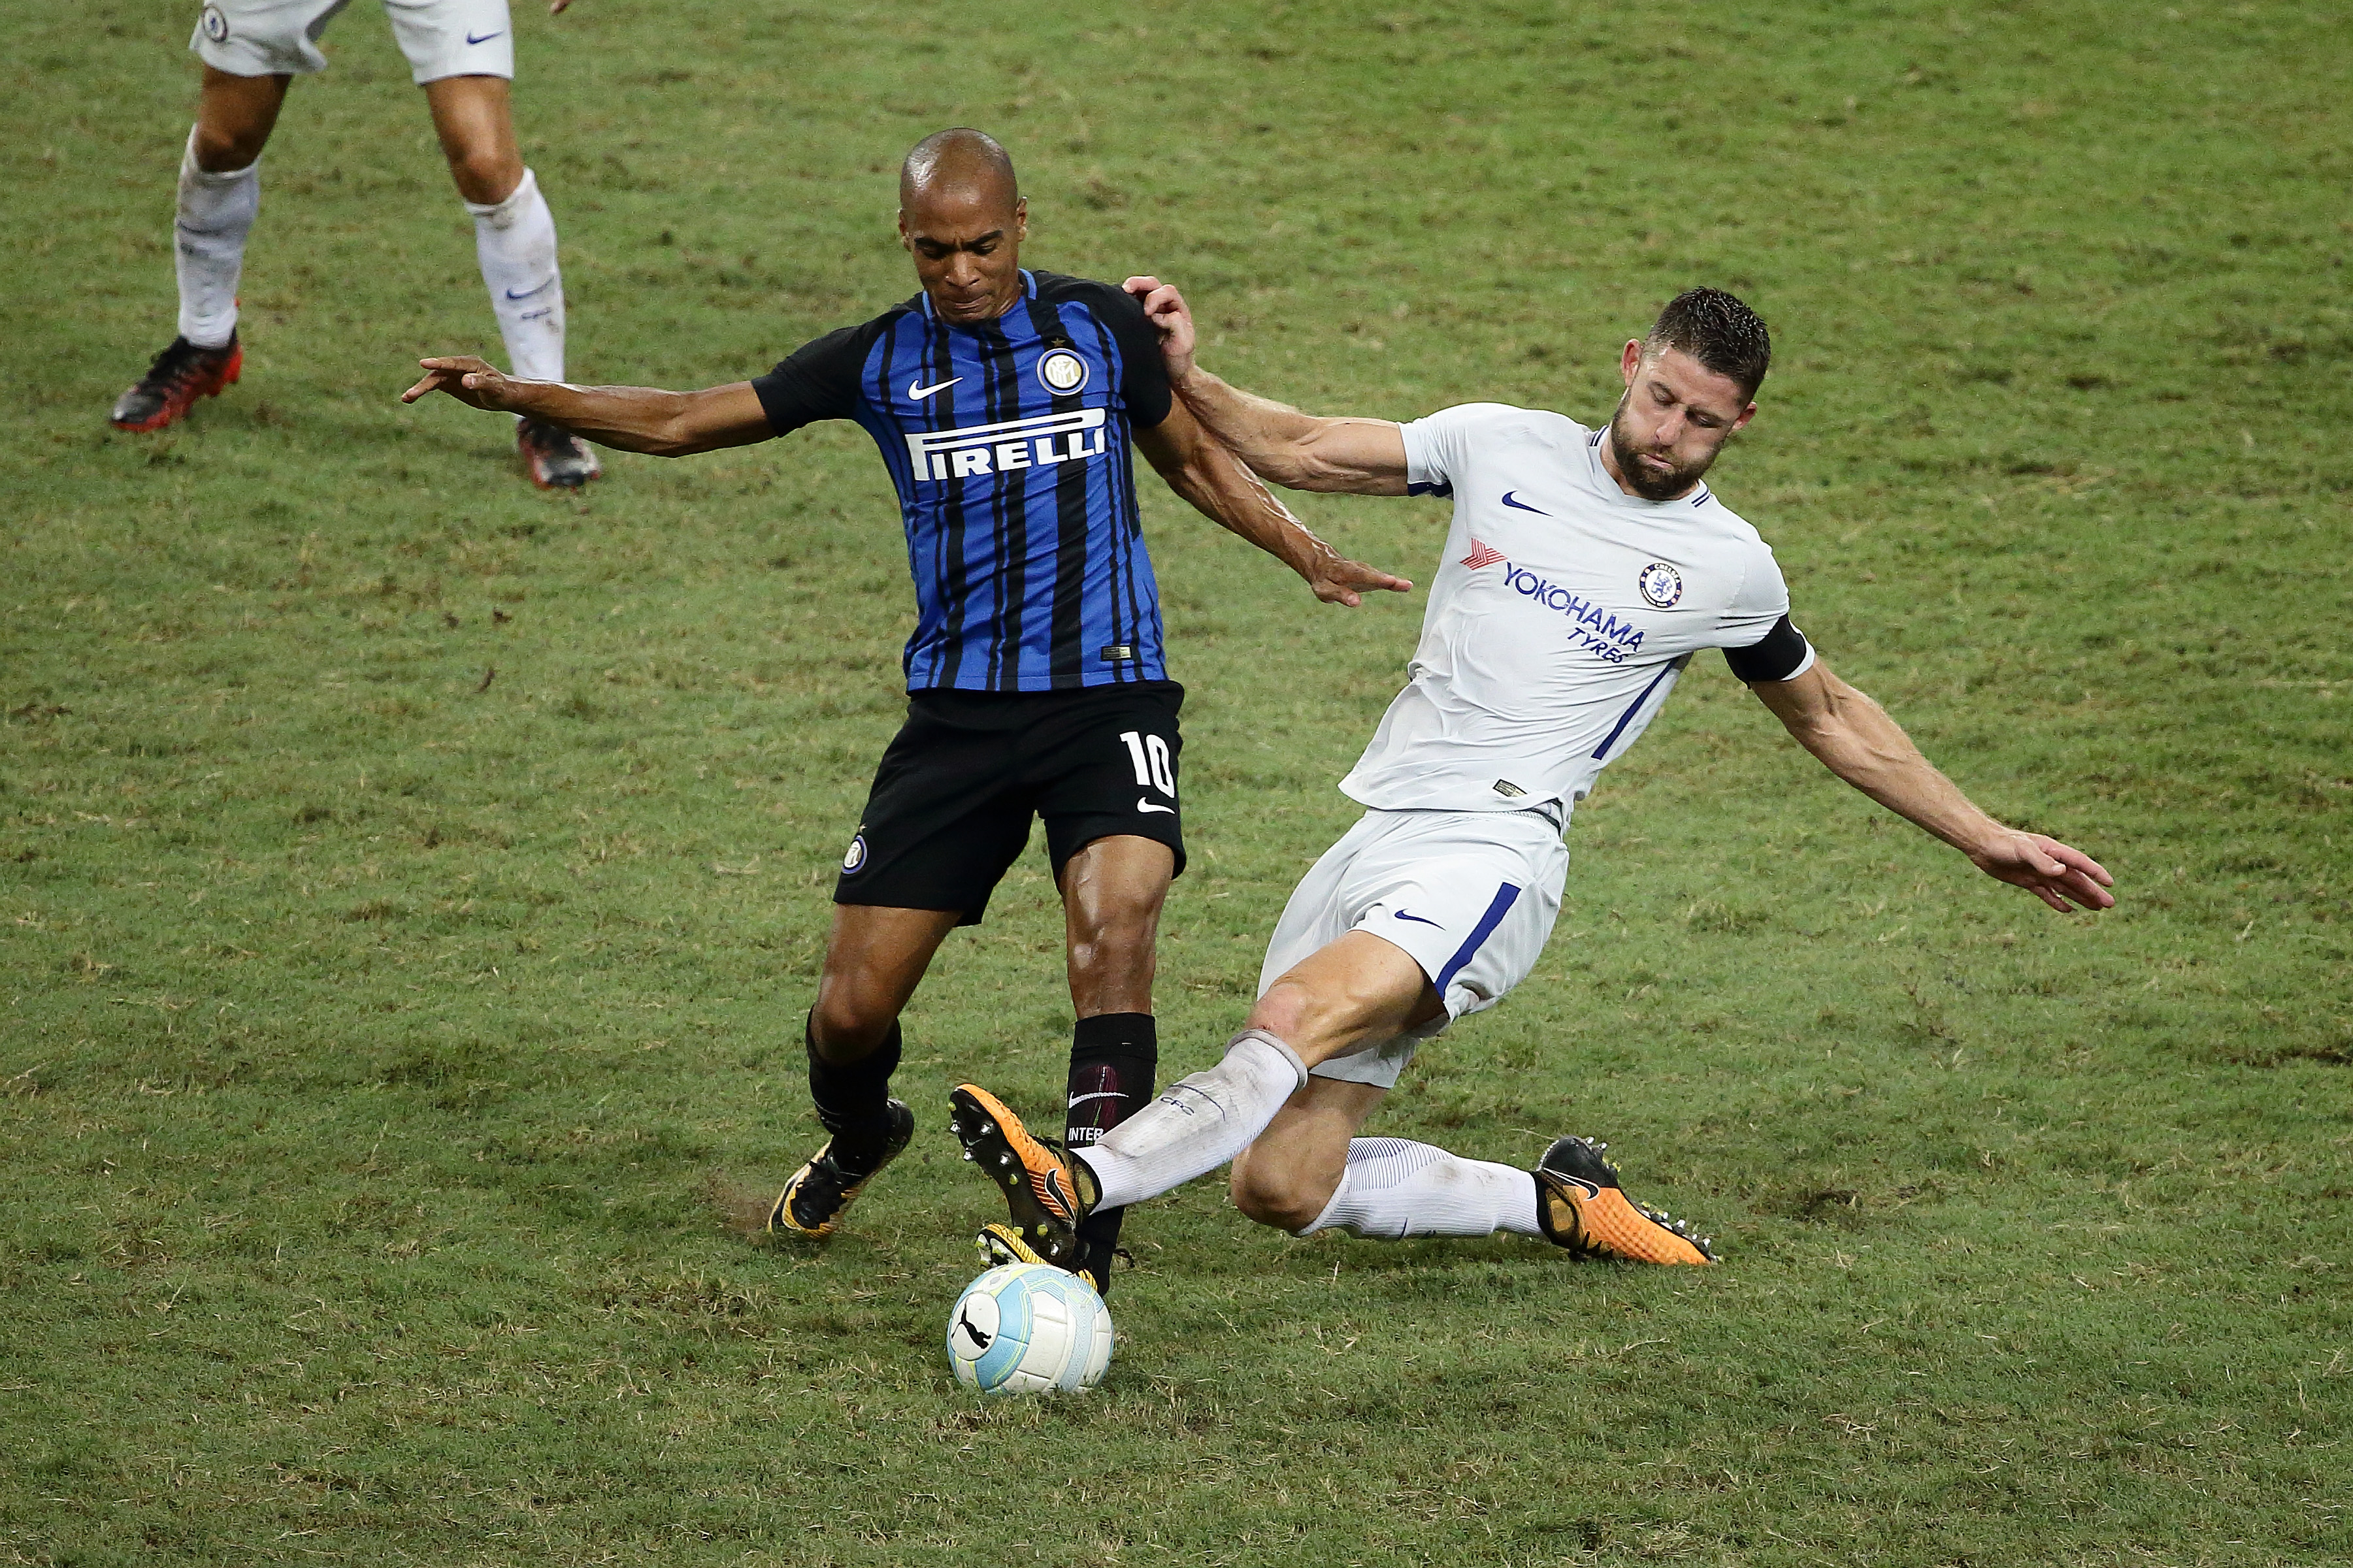 SINGAPORE - JULY 29: Gary Cahill (R) of Chelsea FC and Joao Mario of FC Internazionale challenge for the ball during the International Champions Cup match between FC Internazionale and Chelsea FC at National Stadium on July 29, 2017 in Singapore. (Photo by Suhaimi Abdullah/Getty Images for ICC)